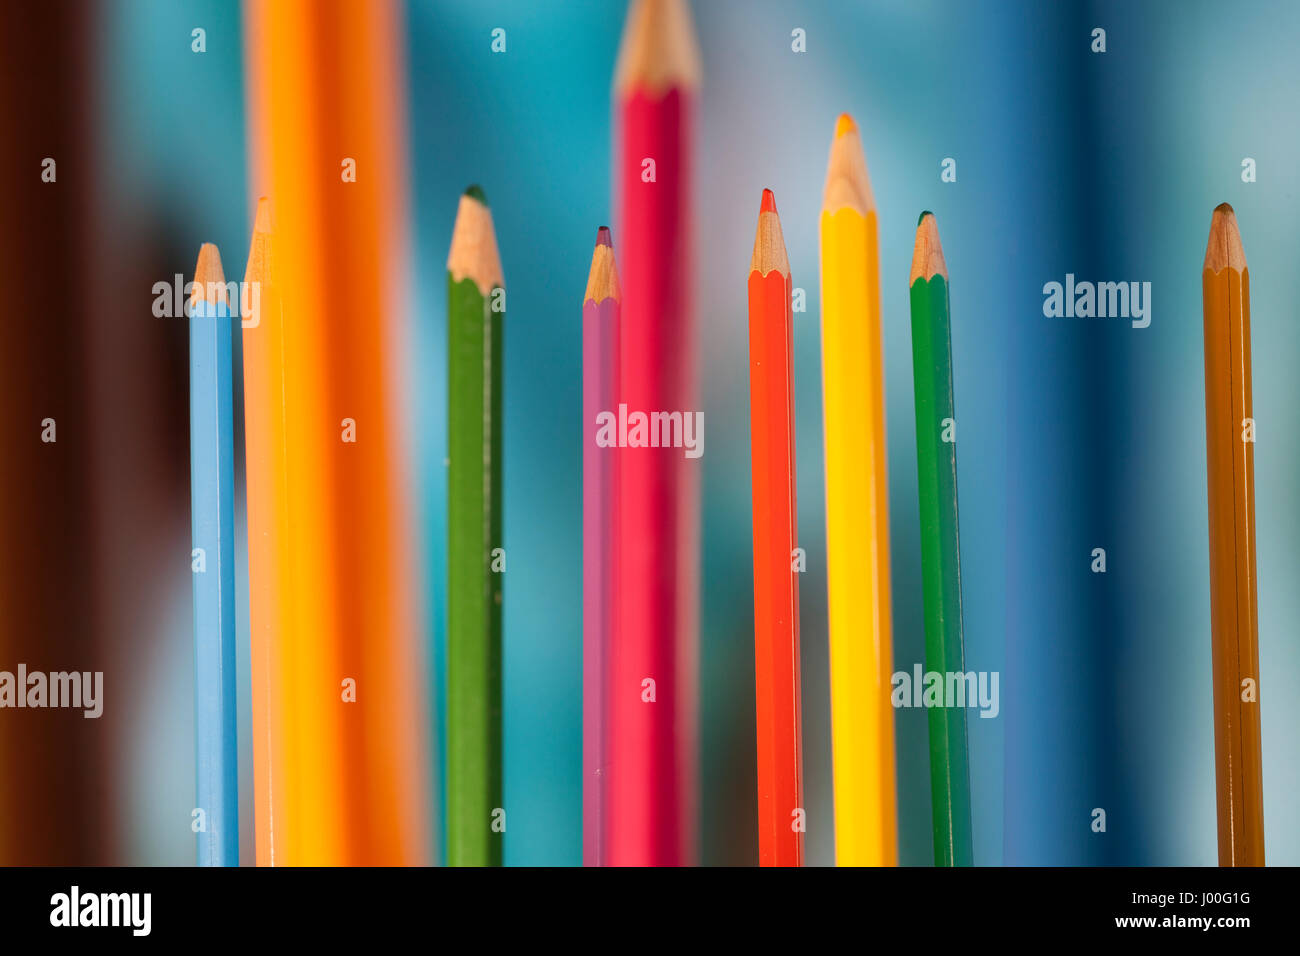 Macro composition of colored pencils standing upright Stock Photo